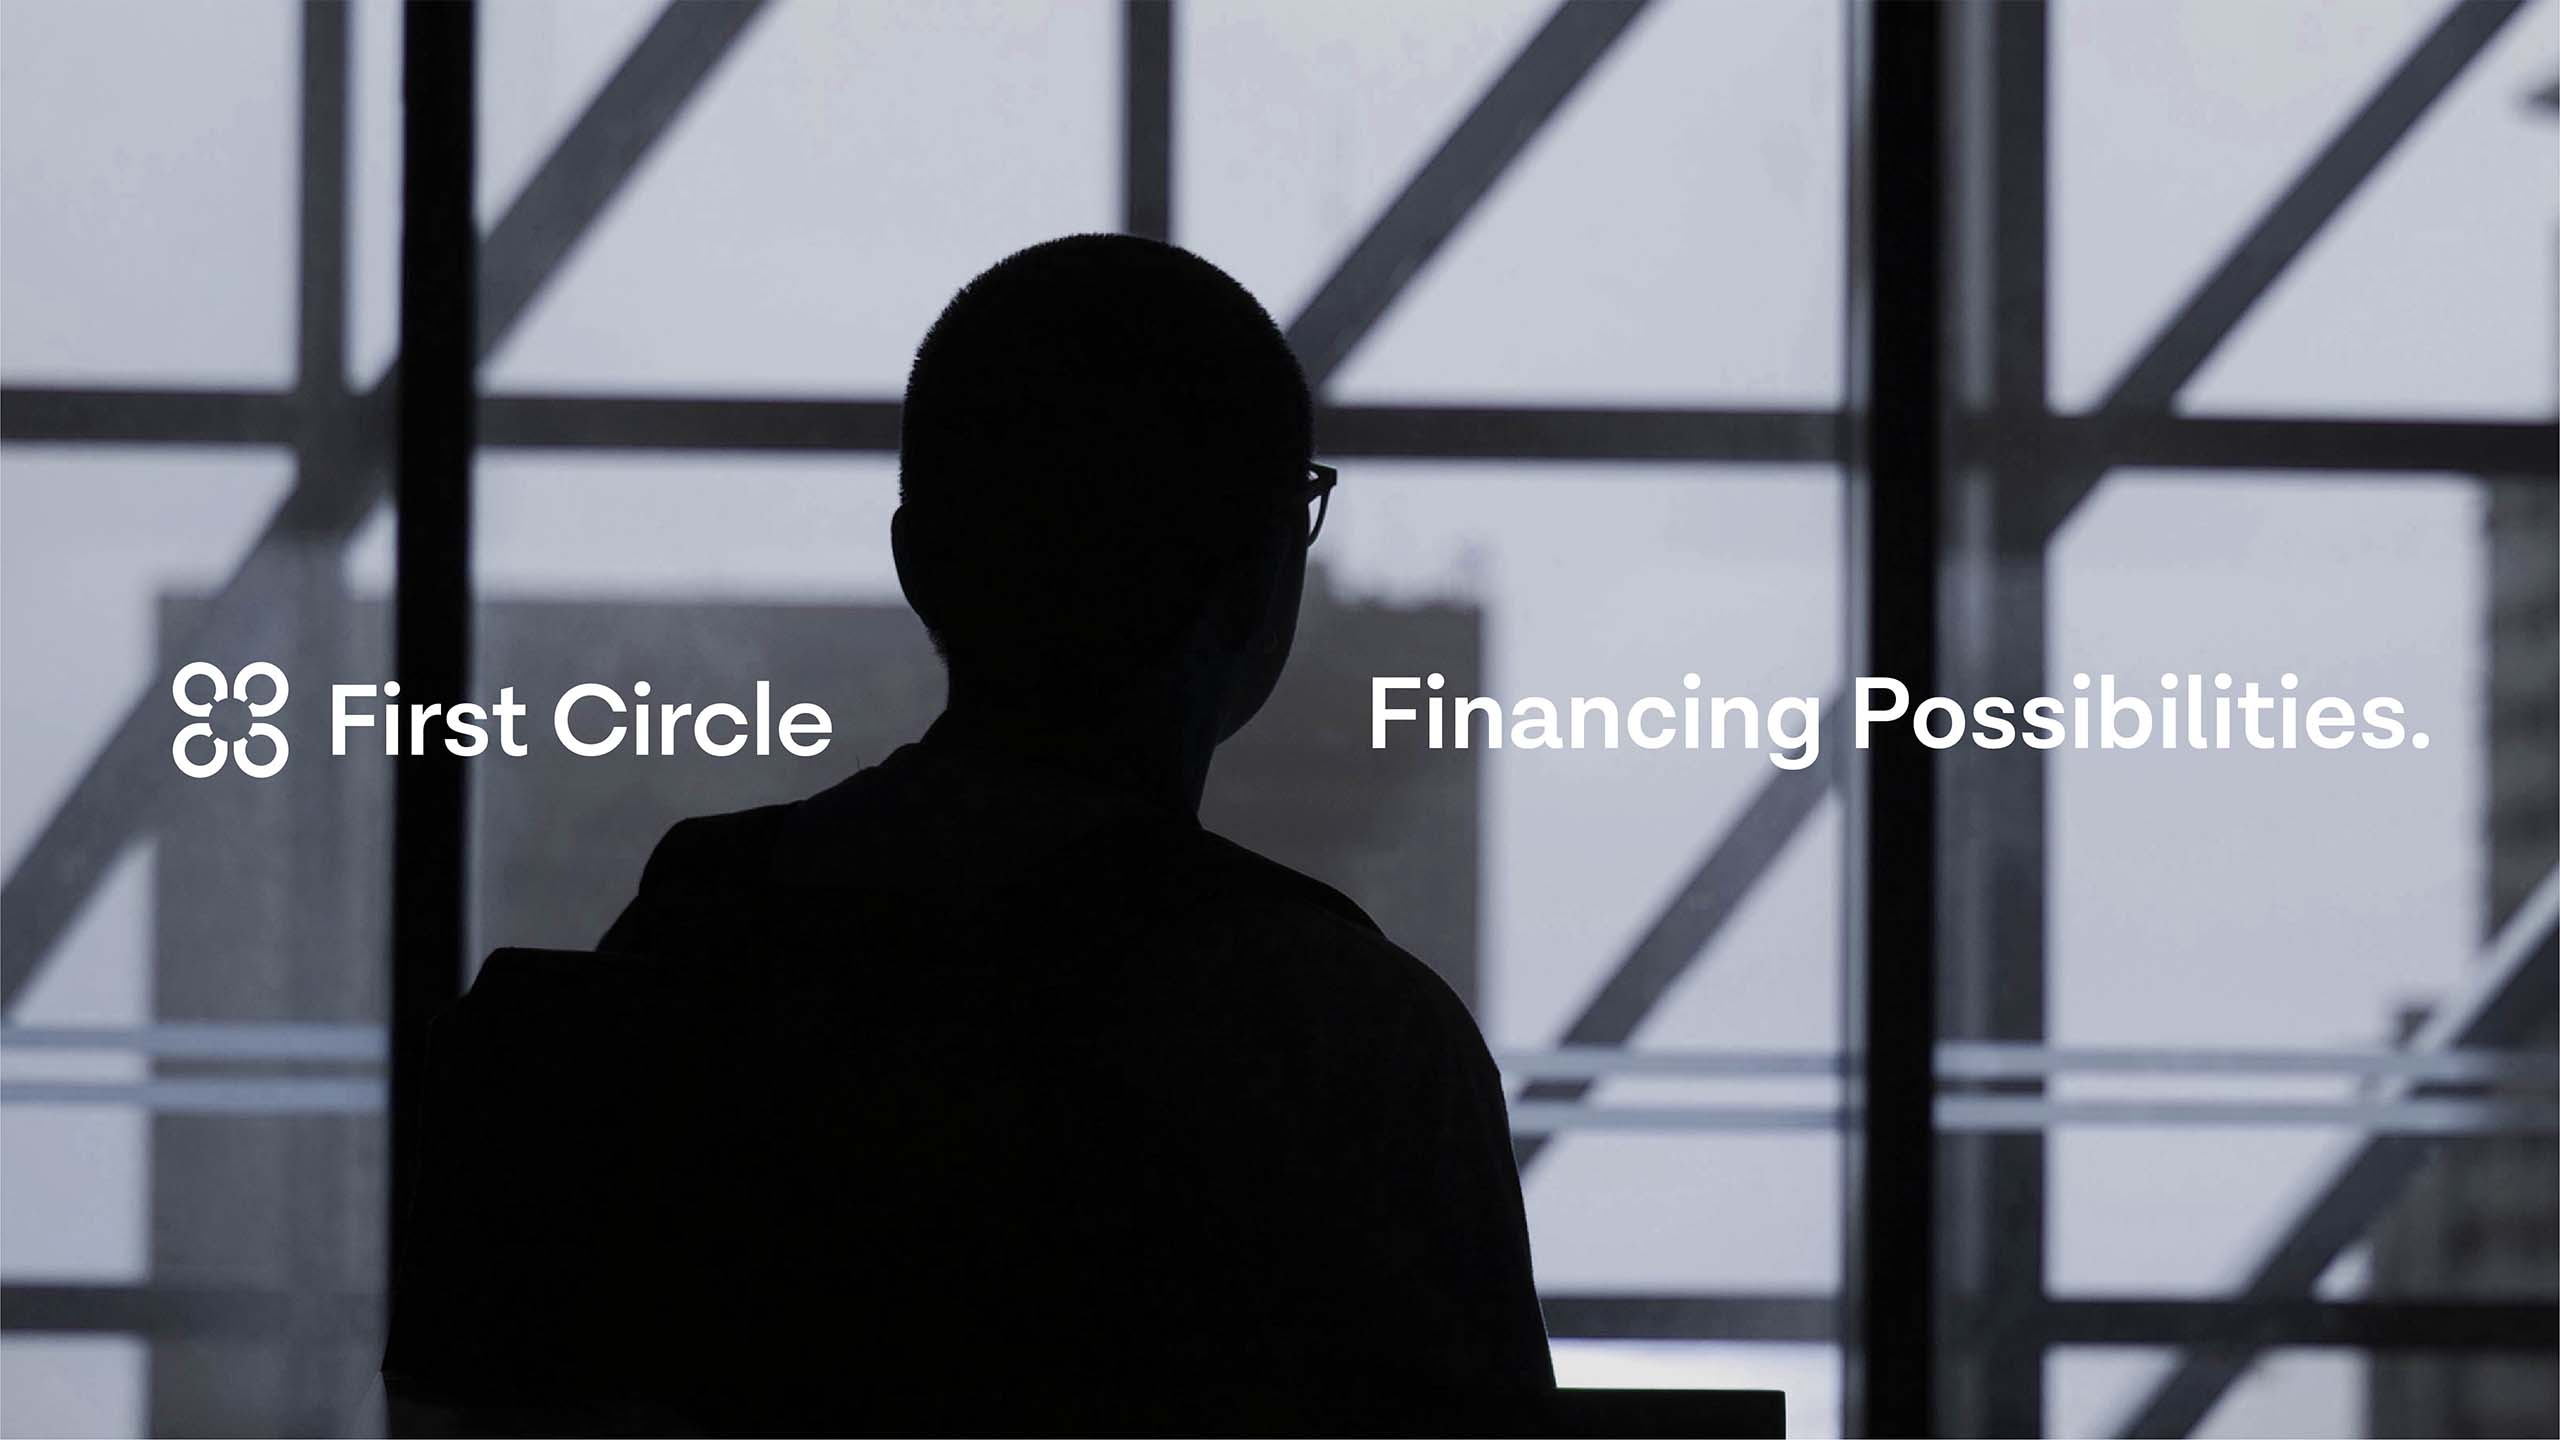 Brand tagline with a photo of a man looking out the window designed for technology finance brand First Circle